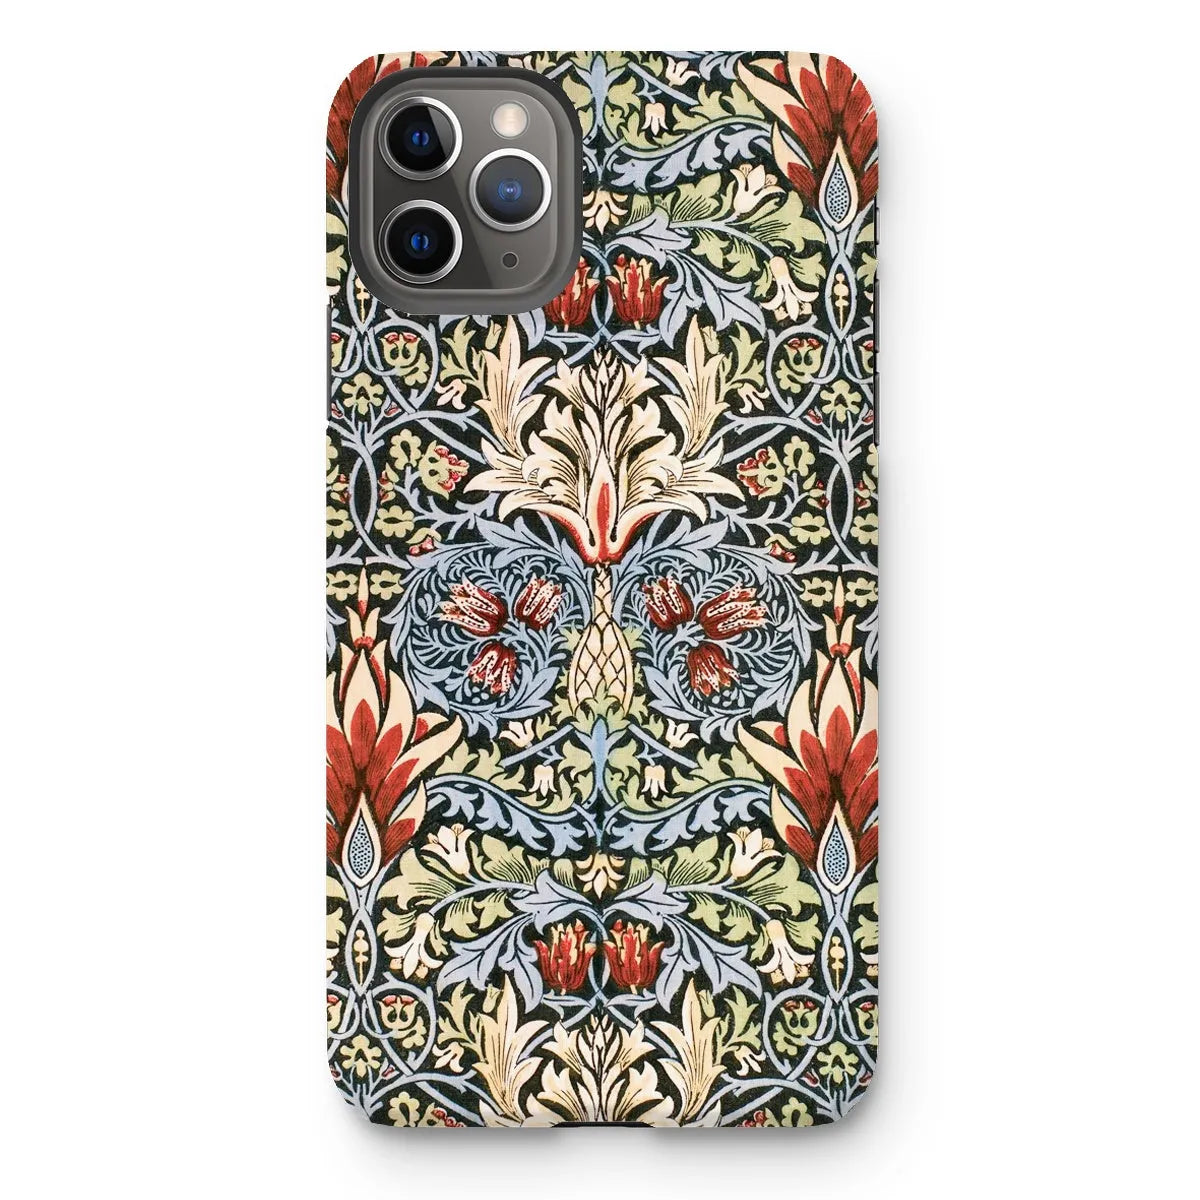 Snakeshead - Arts And Crafts Pattern Phone Case - William Morris - Iphone 11 Pro Max / Matte - Mobile Phone Cases